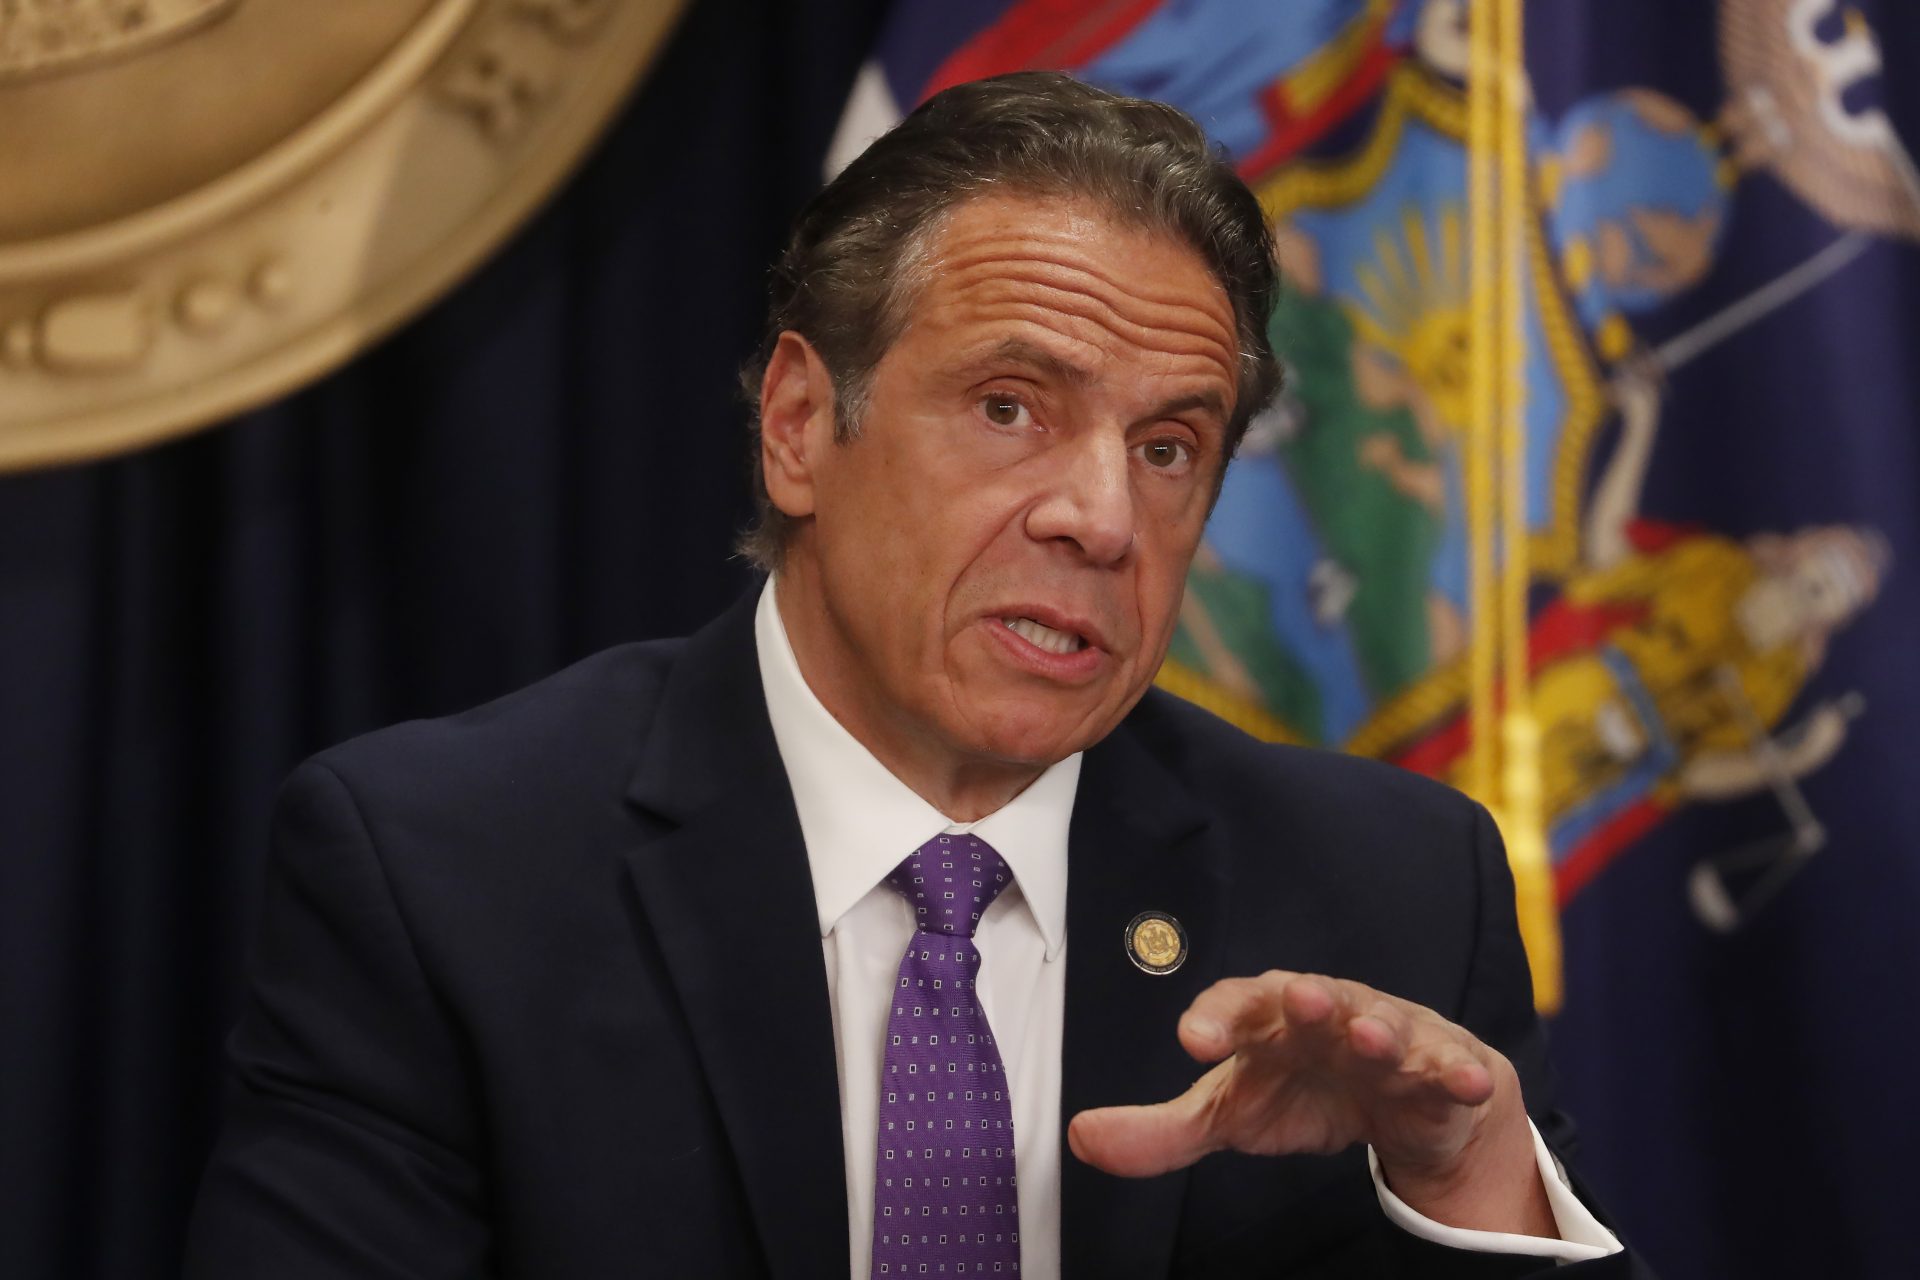 Former New York Governor Andrew Cuomo Files Lawsuit Against State Attorney General Letitia James Stemming From Prior Sexual Misconduct Allegations That Led To His Resignation